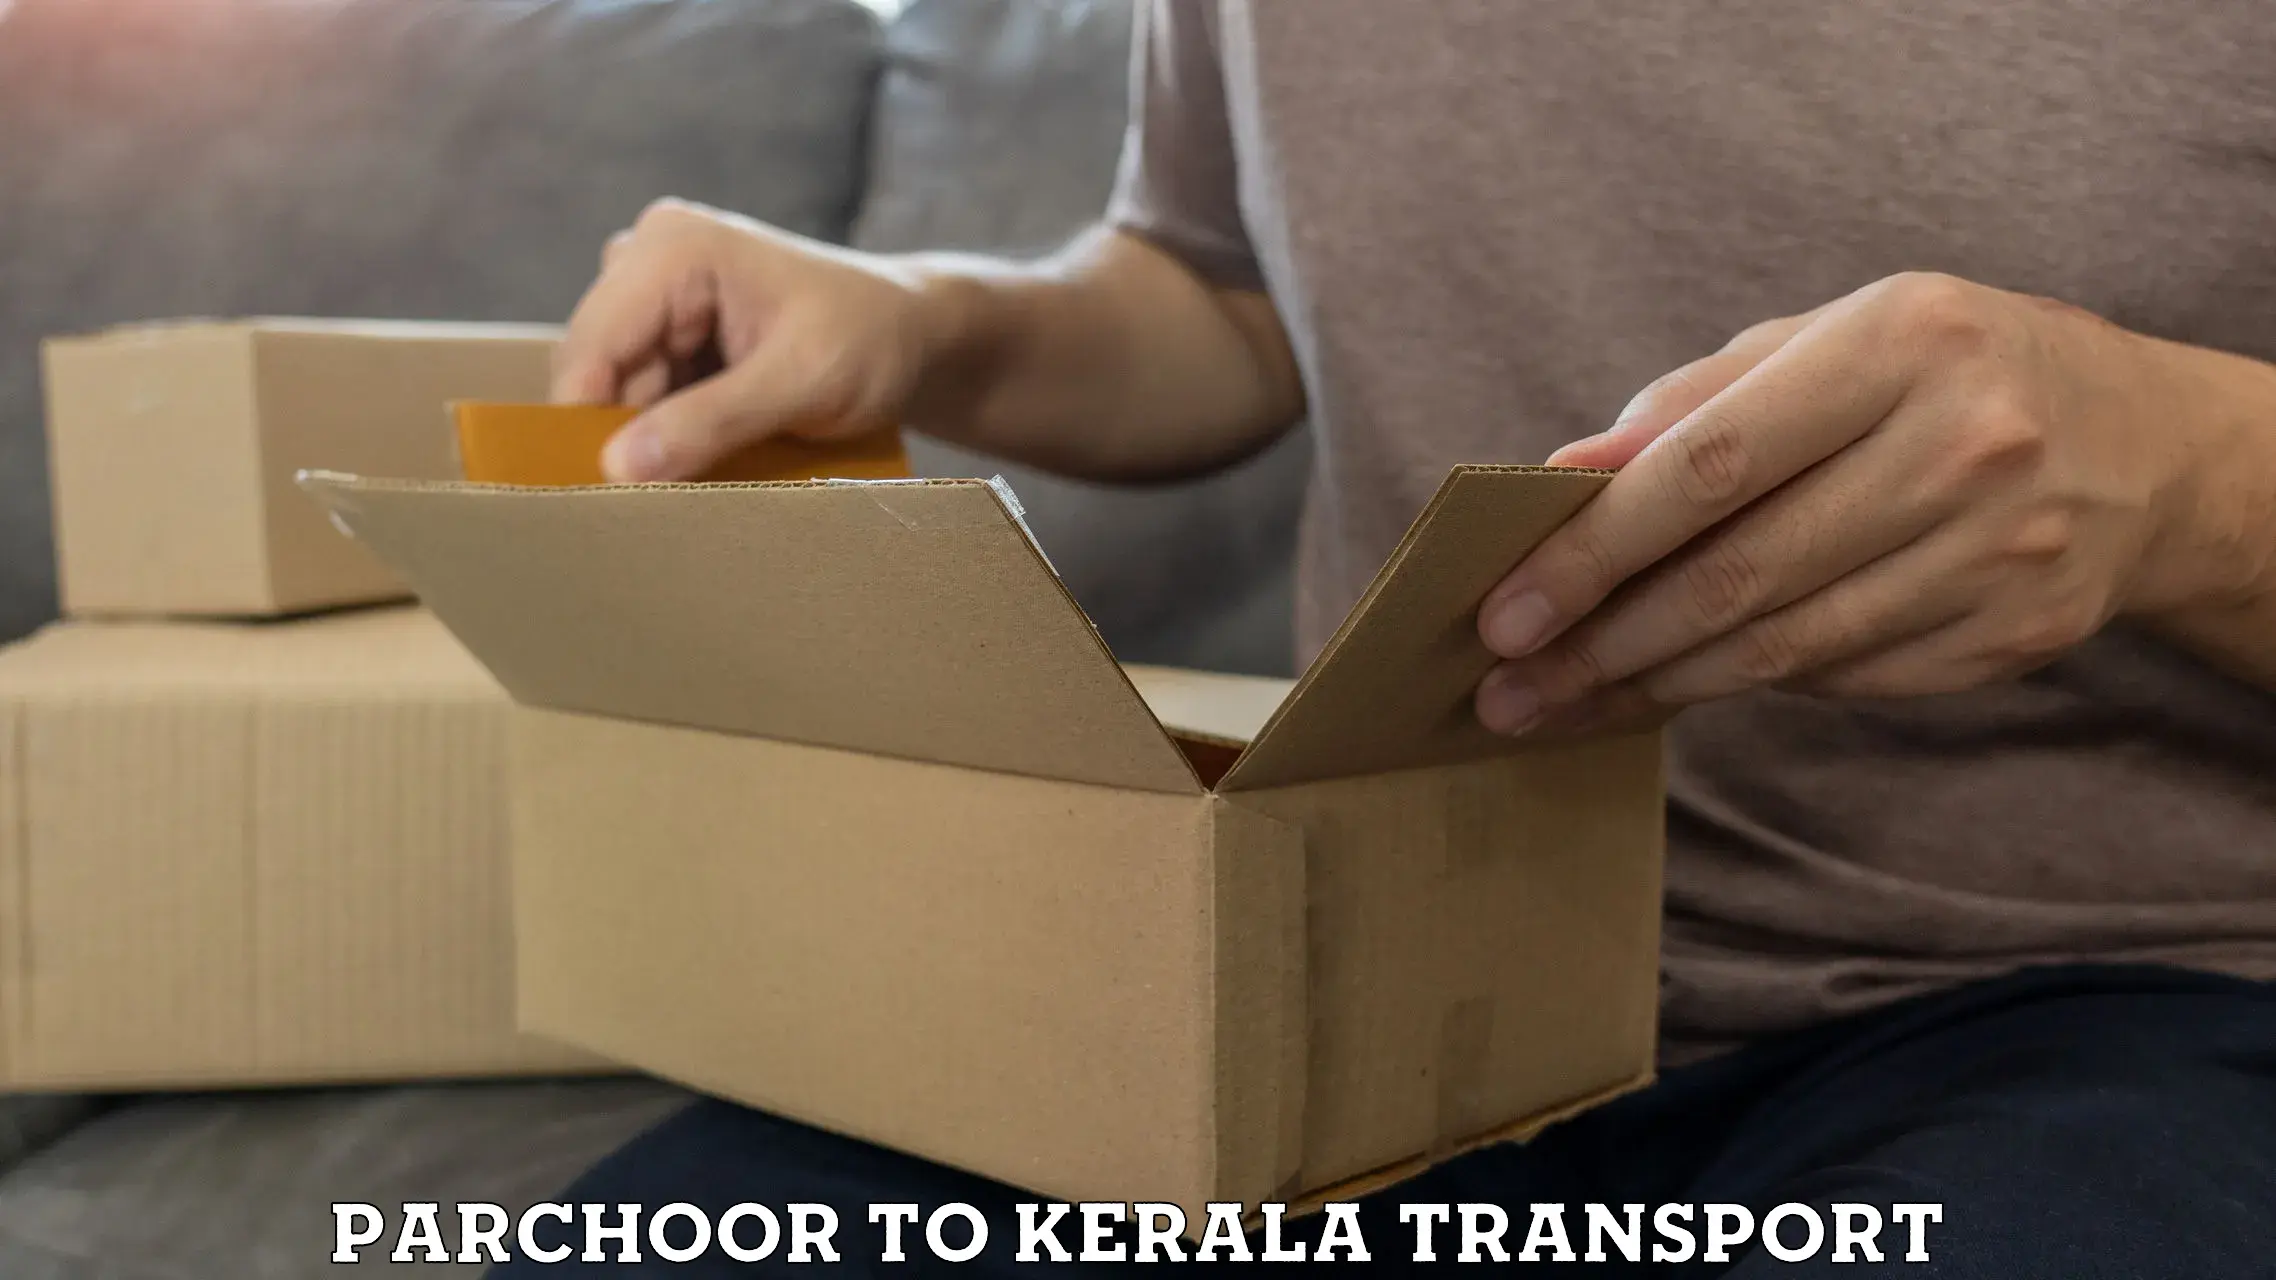 Online transport service Parchoor to Angamaly